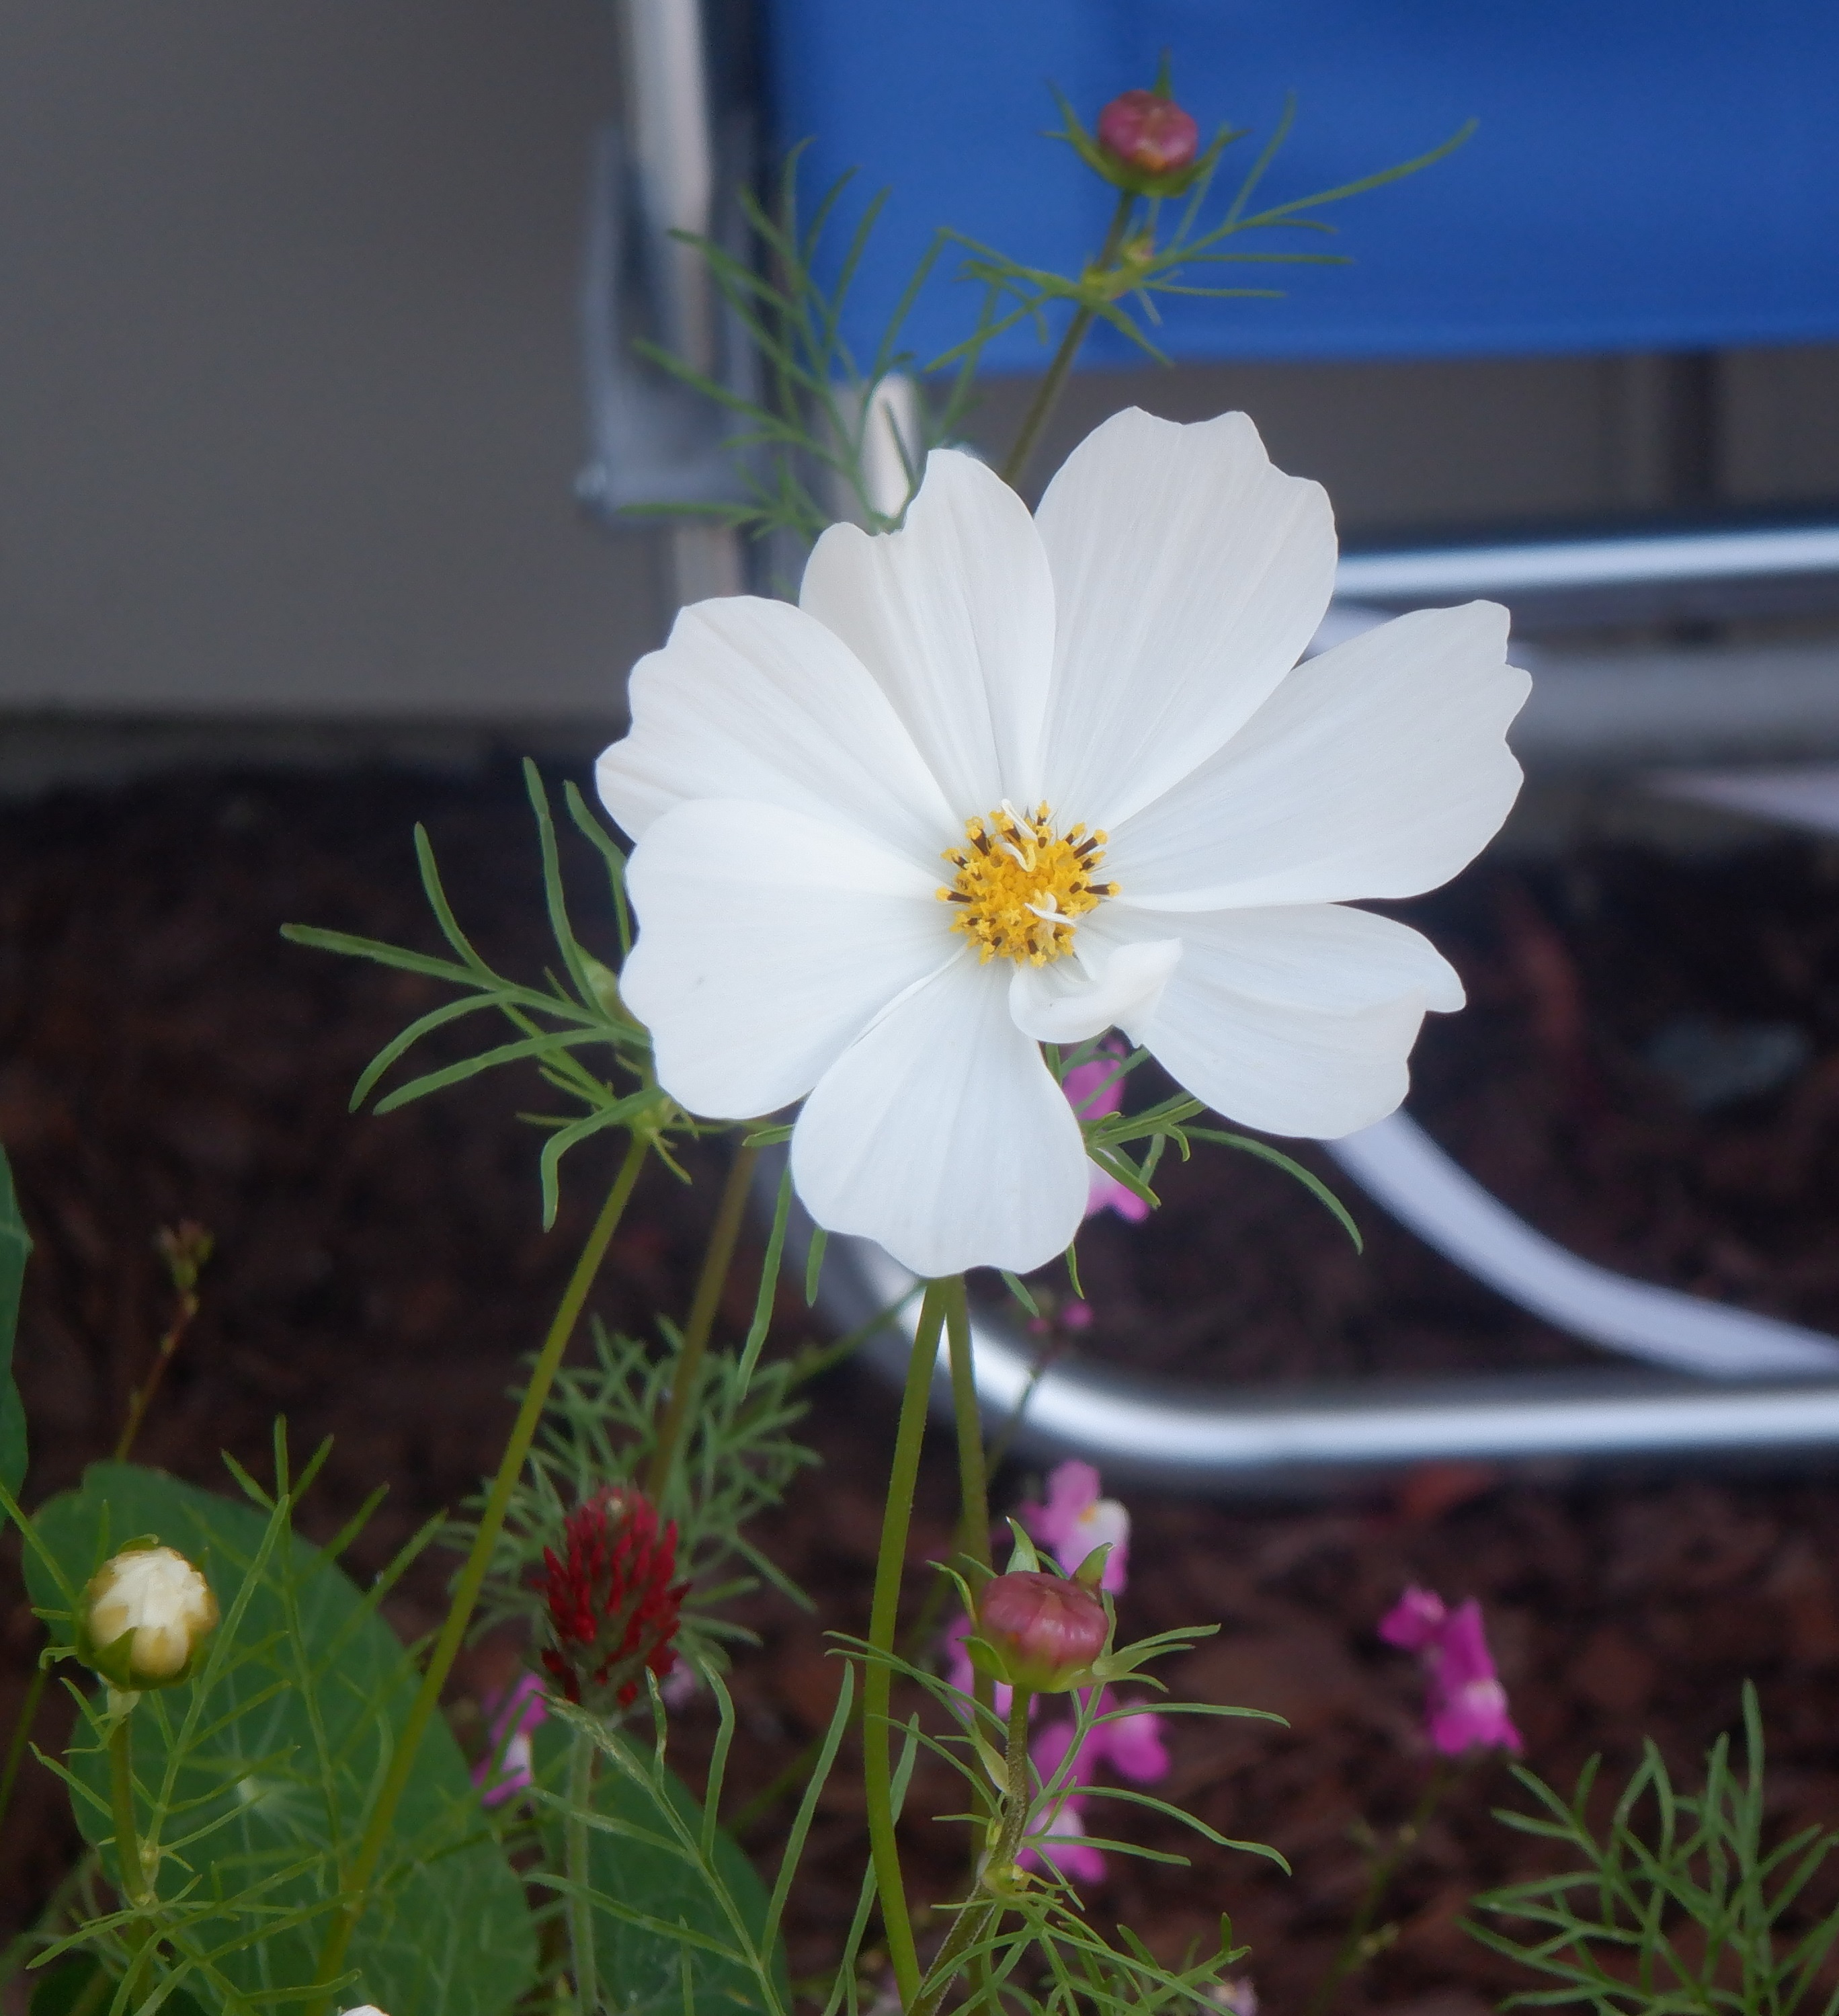 Photo I took of a white cosmos on my patio